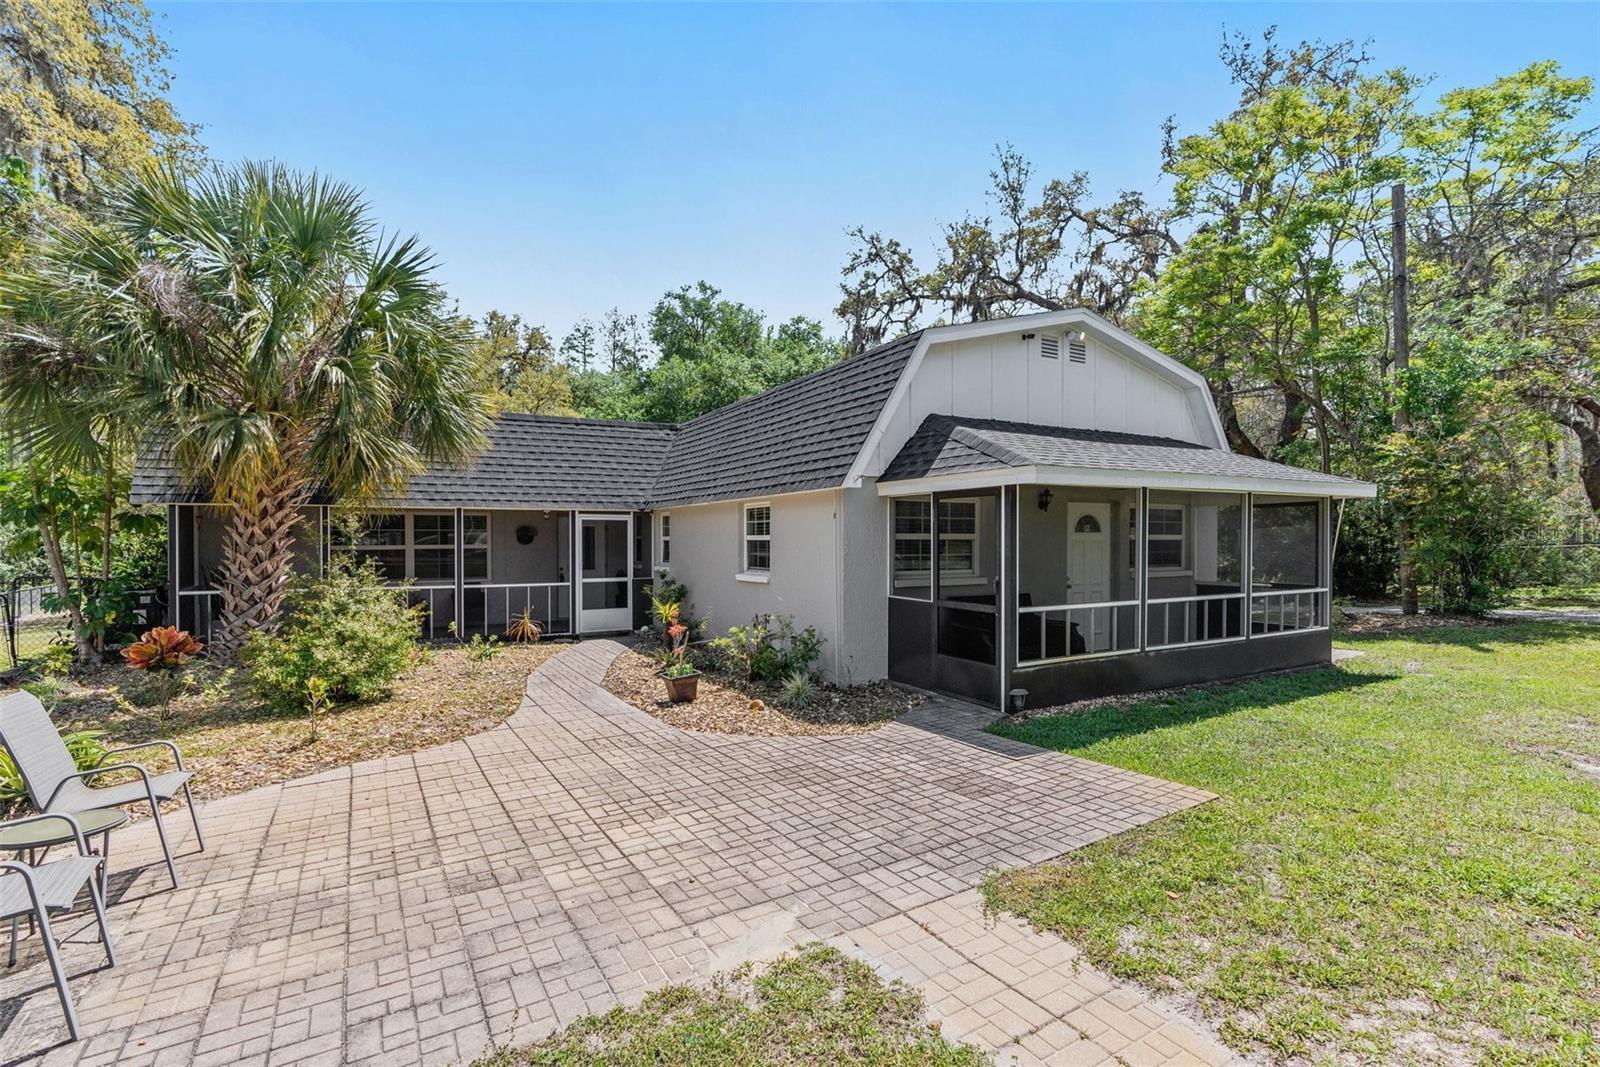 Photo one of 10132 Hilltop Dr New Port Richey FL 34654 | MLS W7863222